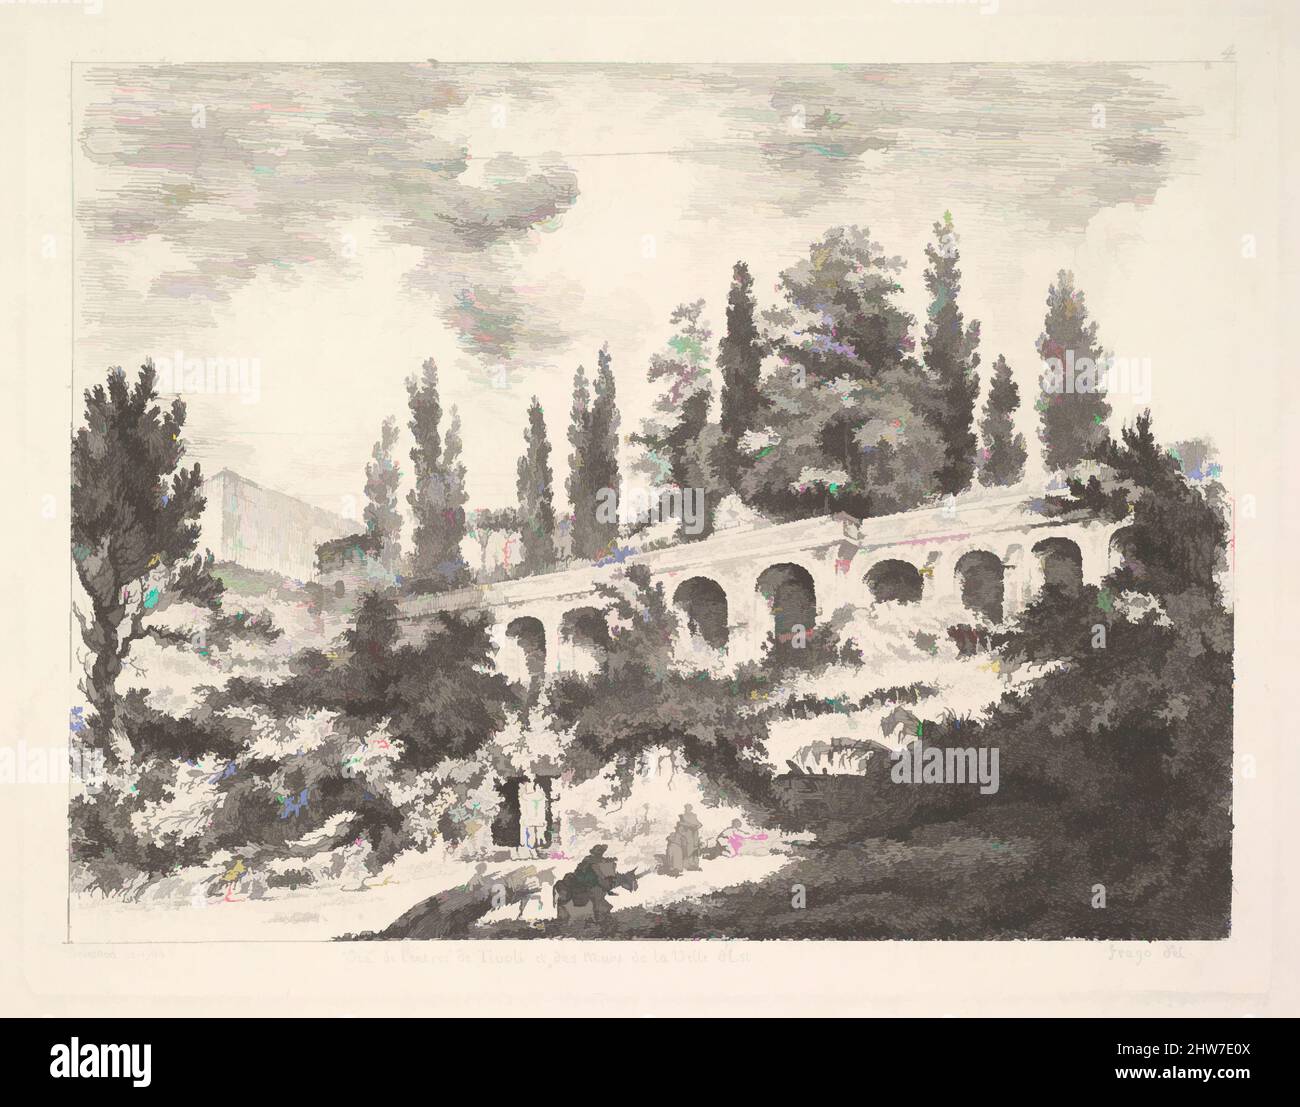 Art inspired by View of the entrance to Tivoli and the walls of the Villa d'Este, horsemen approaching the entrance at bottom center, arched entrance in the middleground, cyrus trees and other plants surrounding, 18th century, Etching, sheet: 7 3/16 x 9 3/8 in. (18.3 x 23.8 cm), Prints, Classic works modernized by Artotop with a splash of modernity. Shapes, color and value, eye-catching visual impact on art. Emotions through freedom of artworks in a contemporary way. A timeless message pursuing a wildly creative new direction. Artists turning to the digital medium and creating the Artotop NFT Stock Photo